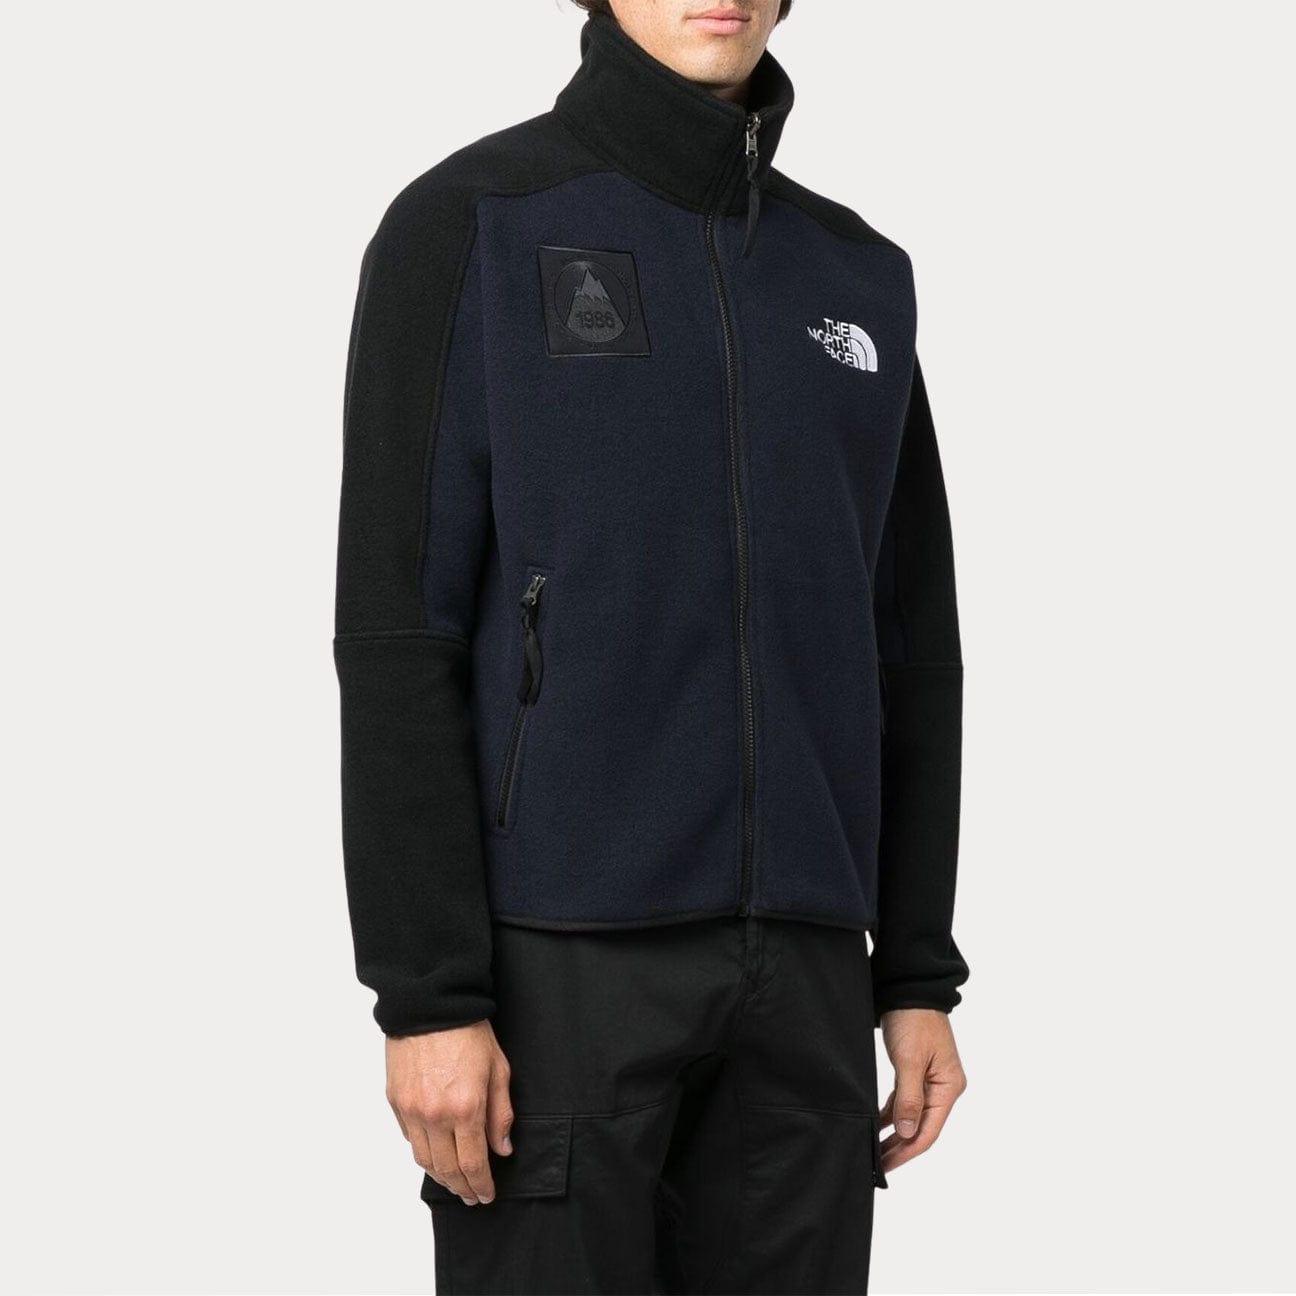 THE NORTH FACE Giacca Mountains 1986 Blue Navy